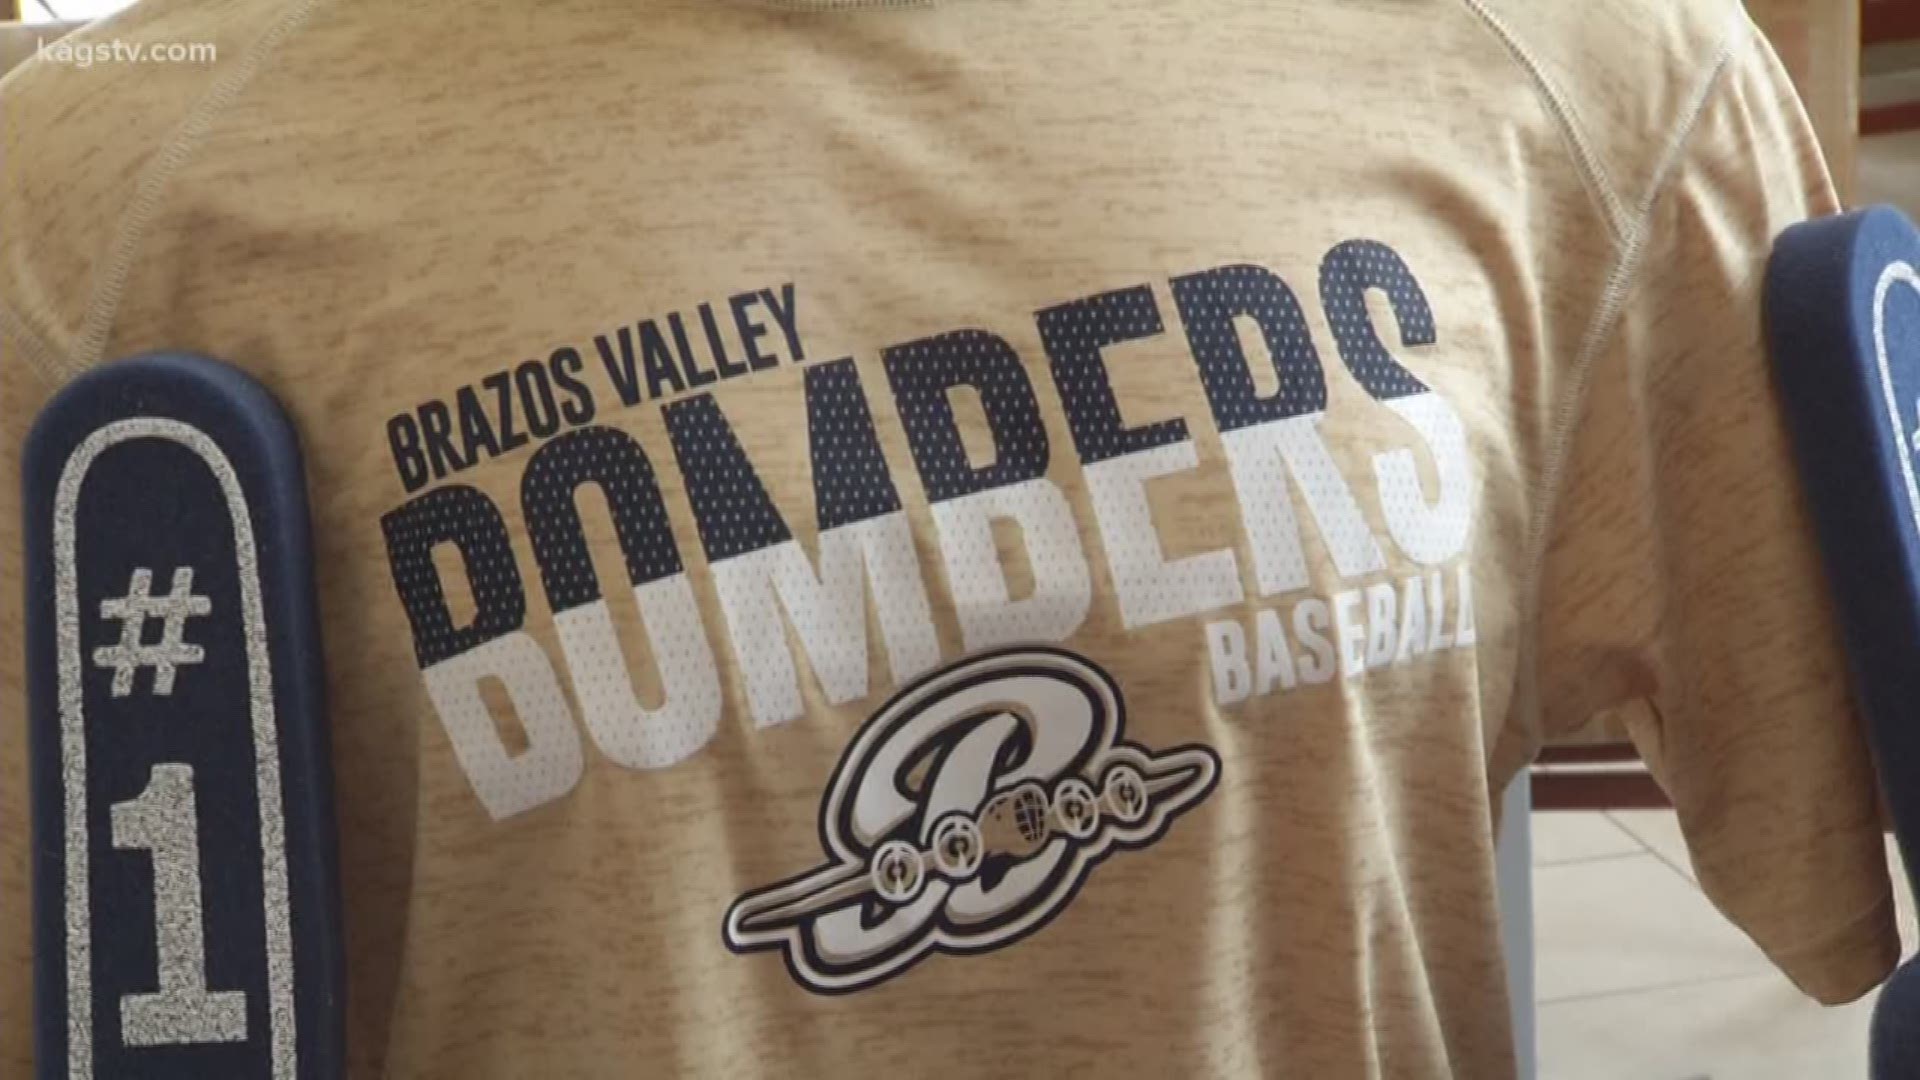 The Brazos Valley Bombers kicked off their 13th season by hosting a press conference on Wednesday afternoon. The Bombers open the 2019 campaign on the road on Friday.